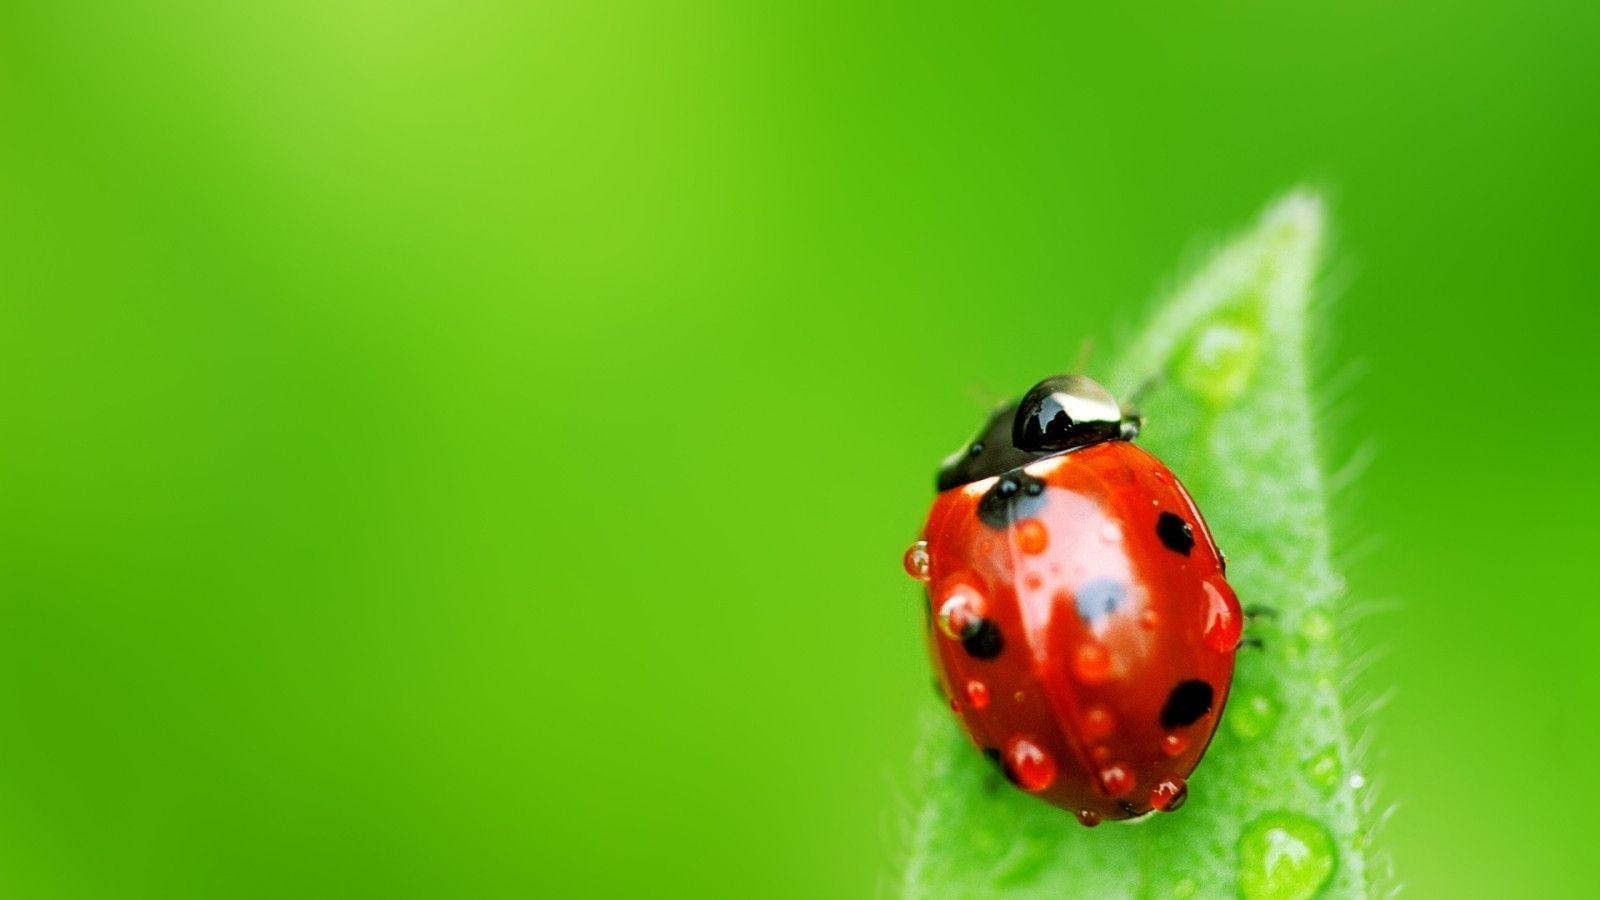 Three Bugs With Green Umbrellas HD Insects Fun Wallpaper